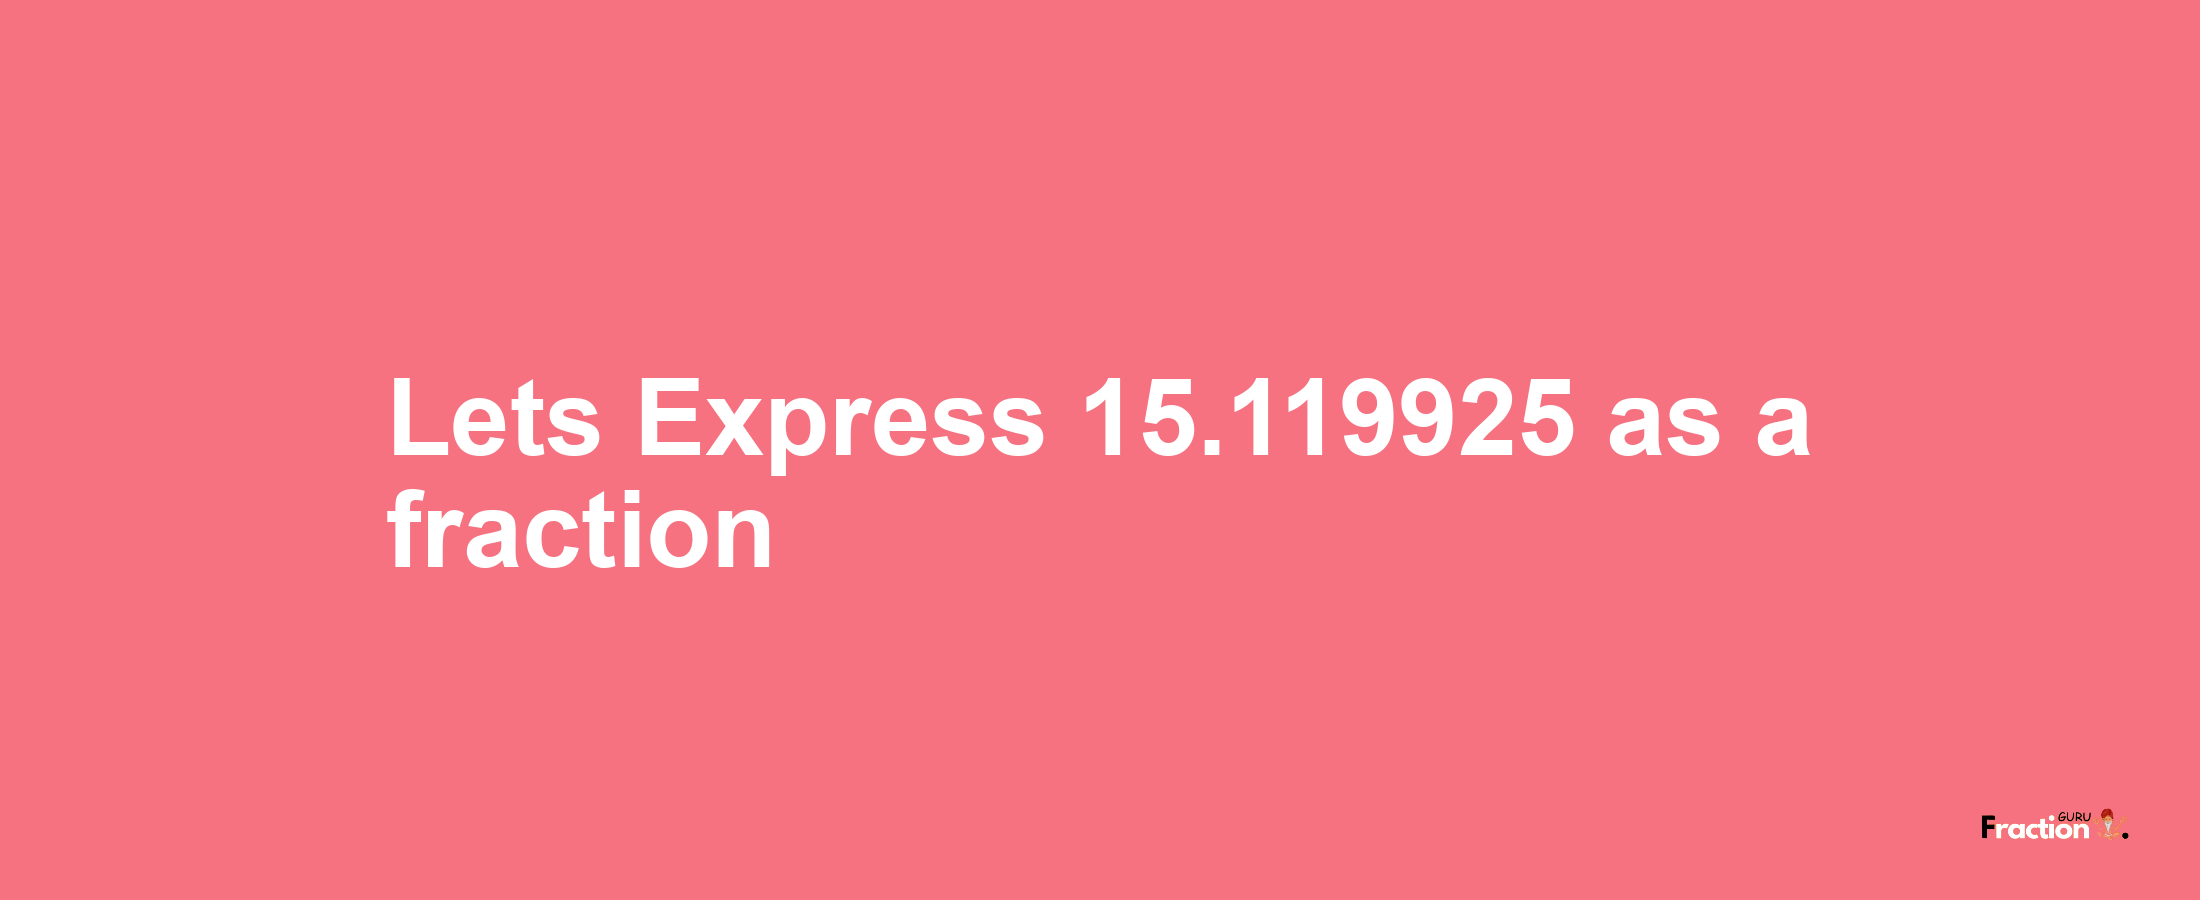 Lets Express 15.119925 as afraction